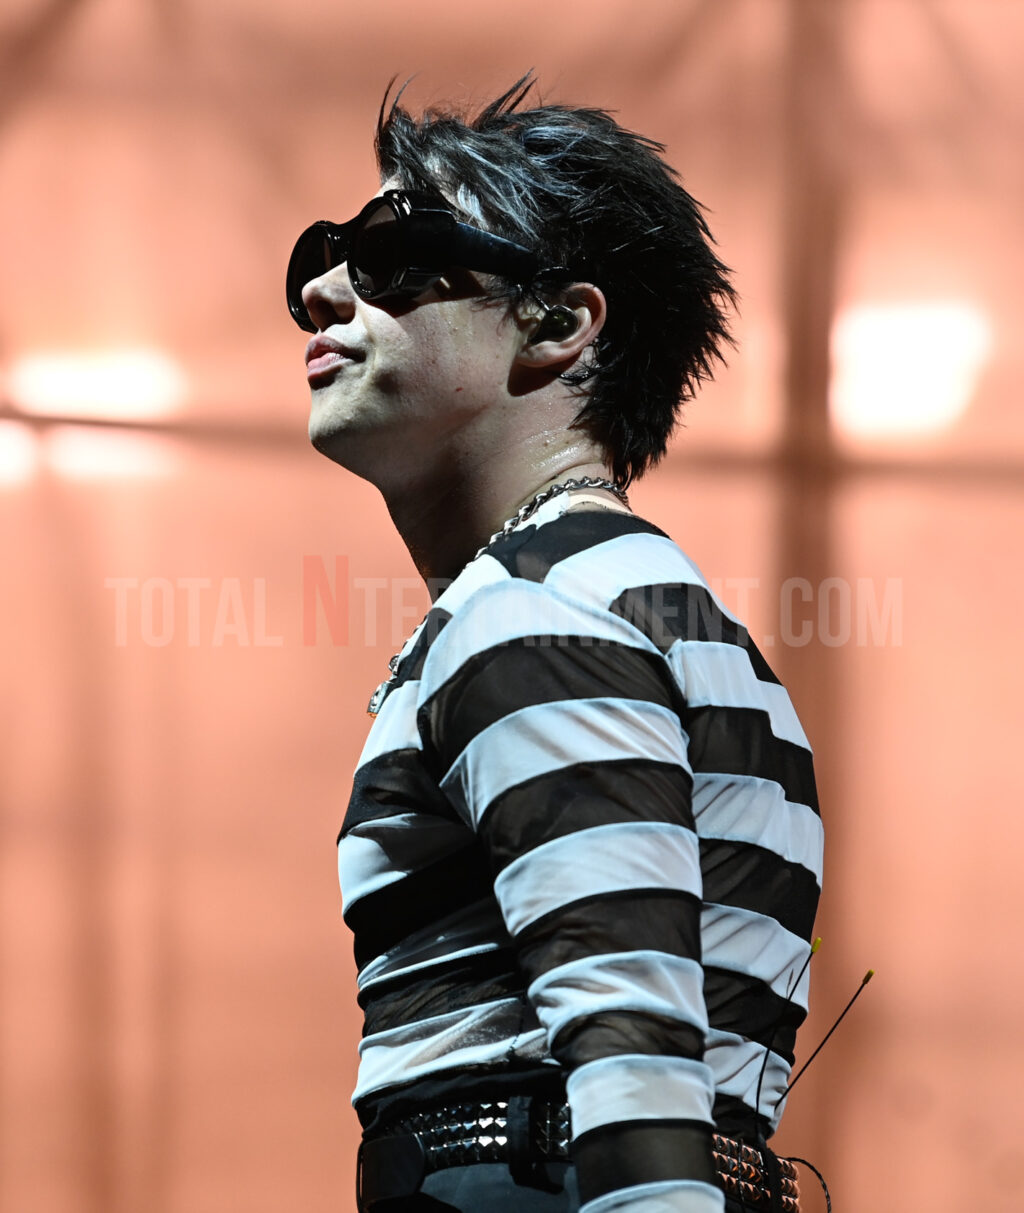 Yungblud, Manchester, Stephen Farrell, Music, Live Event, TotalNtertainment, Music Photography